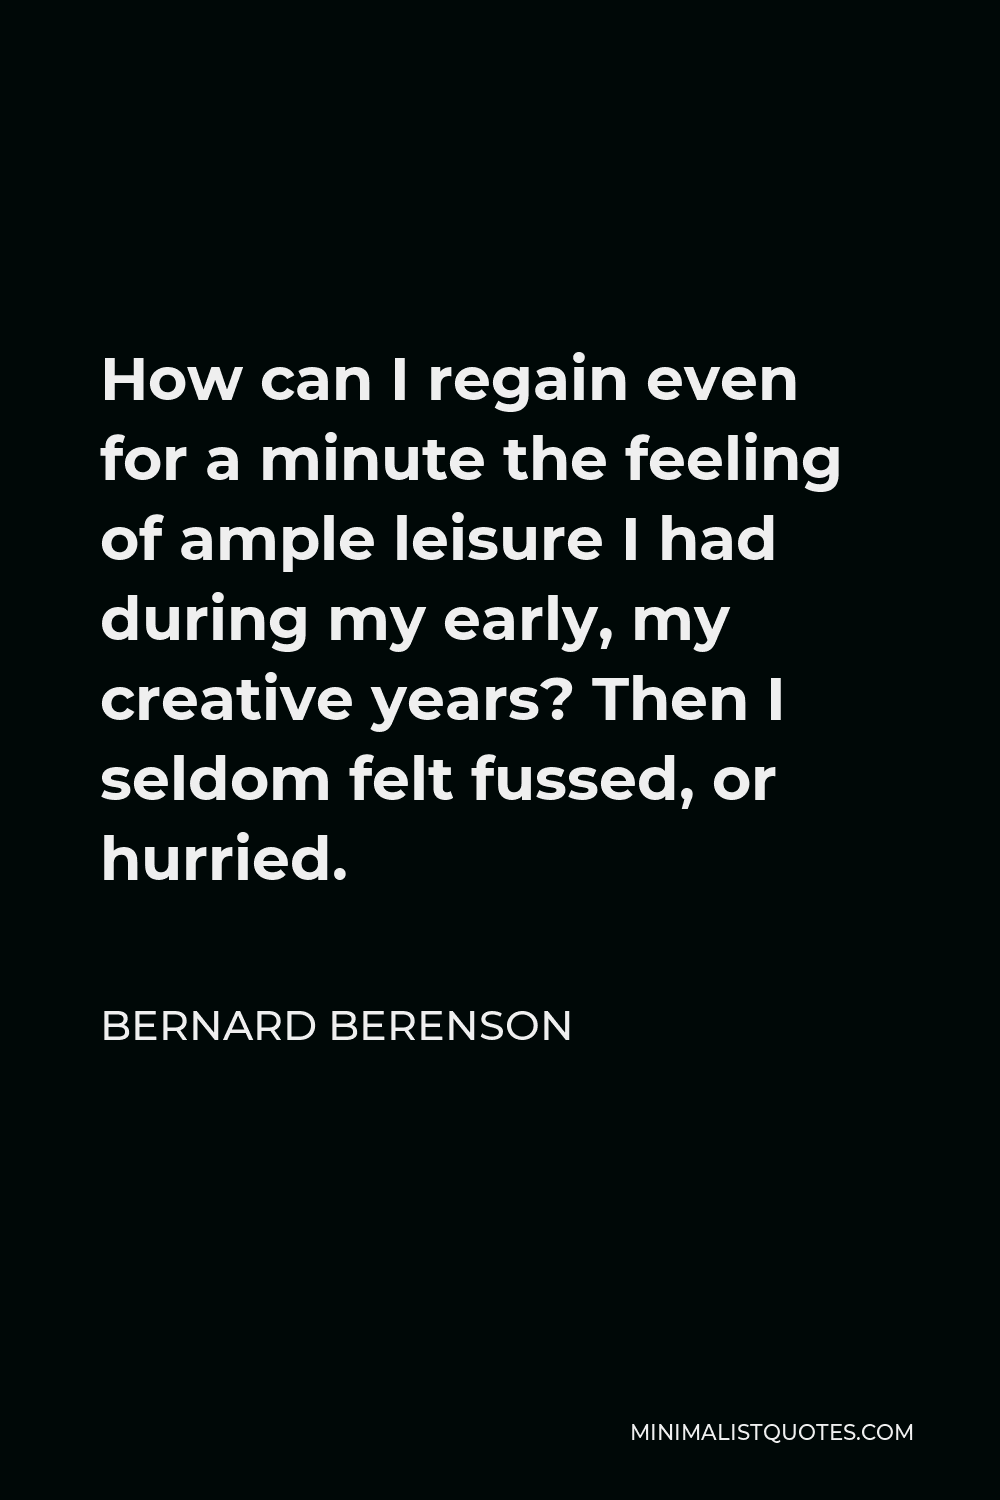 Bernard Berenson Quote - How can I regain even for a minute the feeling of ample leisure I had during my early, my creative years? Then I seldom felt fussed, or hurried.